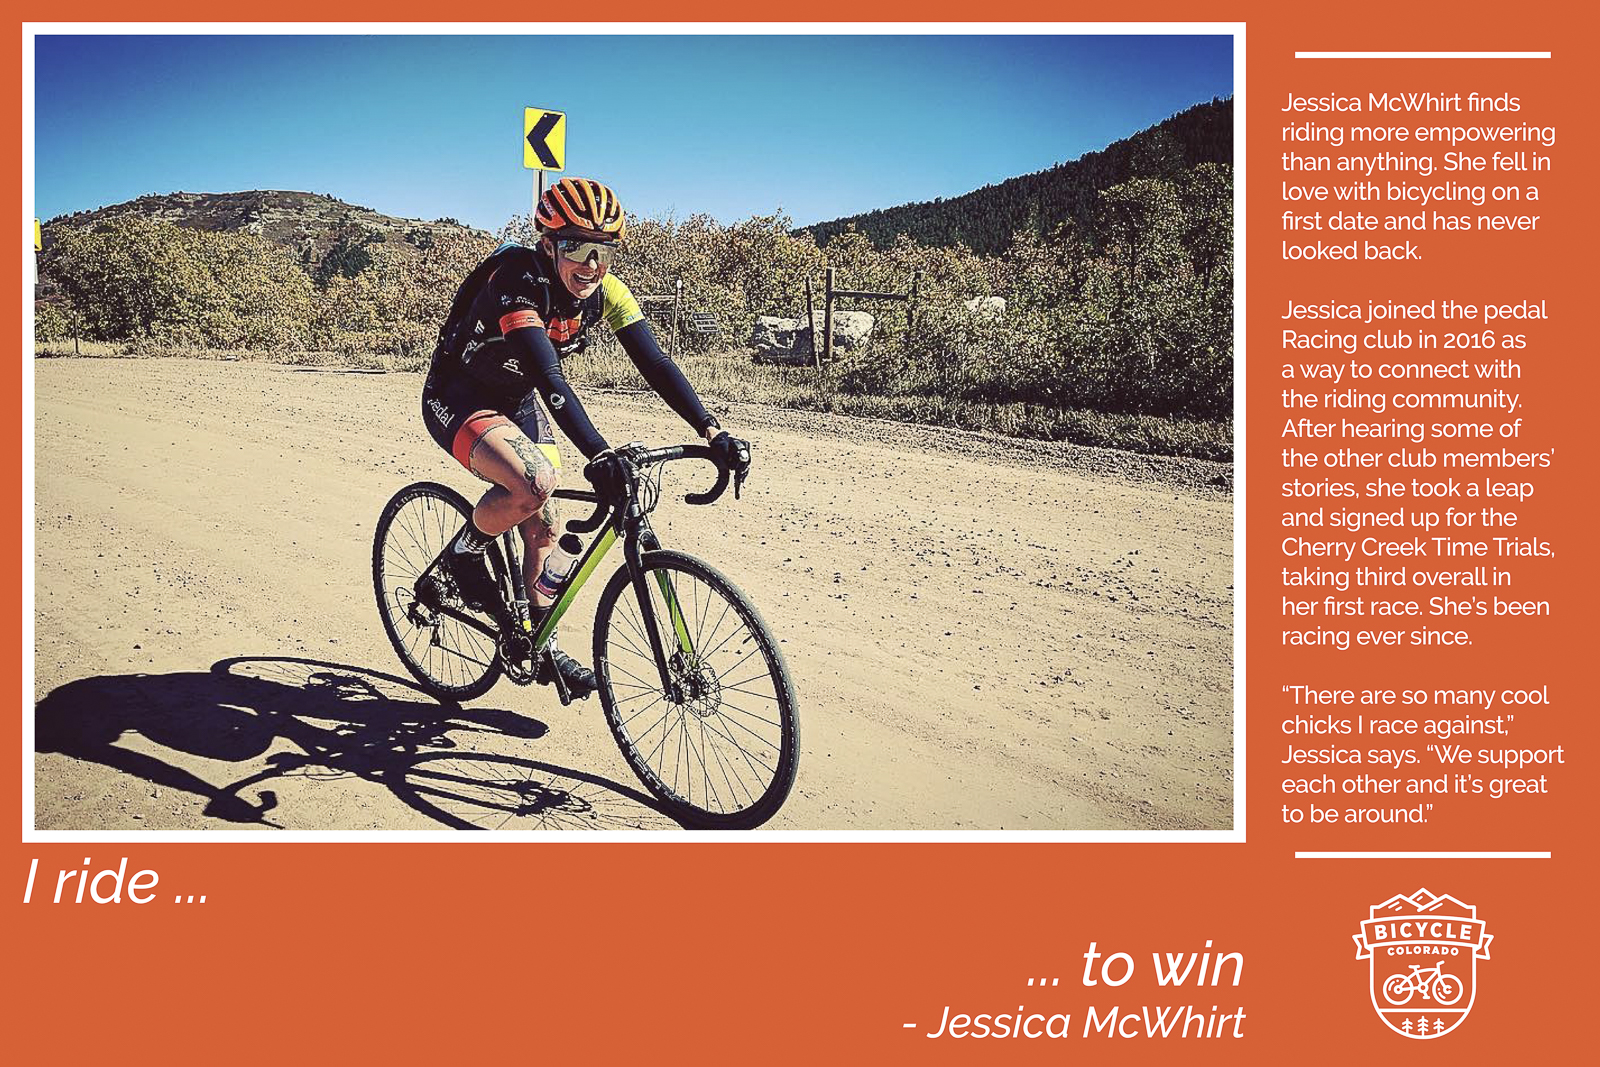 A "why I ride" graphic with Jessica McWhirt. The text reads "I ride to win. Jessica McWhirt finds riding more empowering than anything. She fell in love with bicycling on a first date and has never looked back. Jessica joined the pedal Racing club in 2016 as a way to connect with the riding community. After hearing some of the other club members' stories, she took a leap and signed up for the Cherry Creek Time Trials, taking third overall in her first race. She's been racing ever since. "There are so many cool chicks I race against," Jessica says. "We support each other and it's great to be around.""